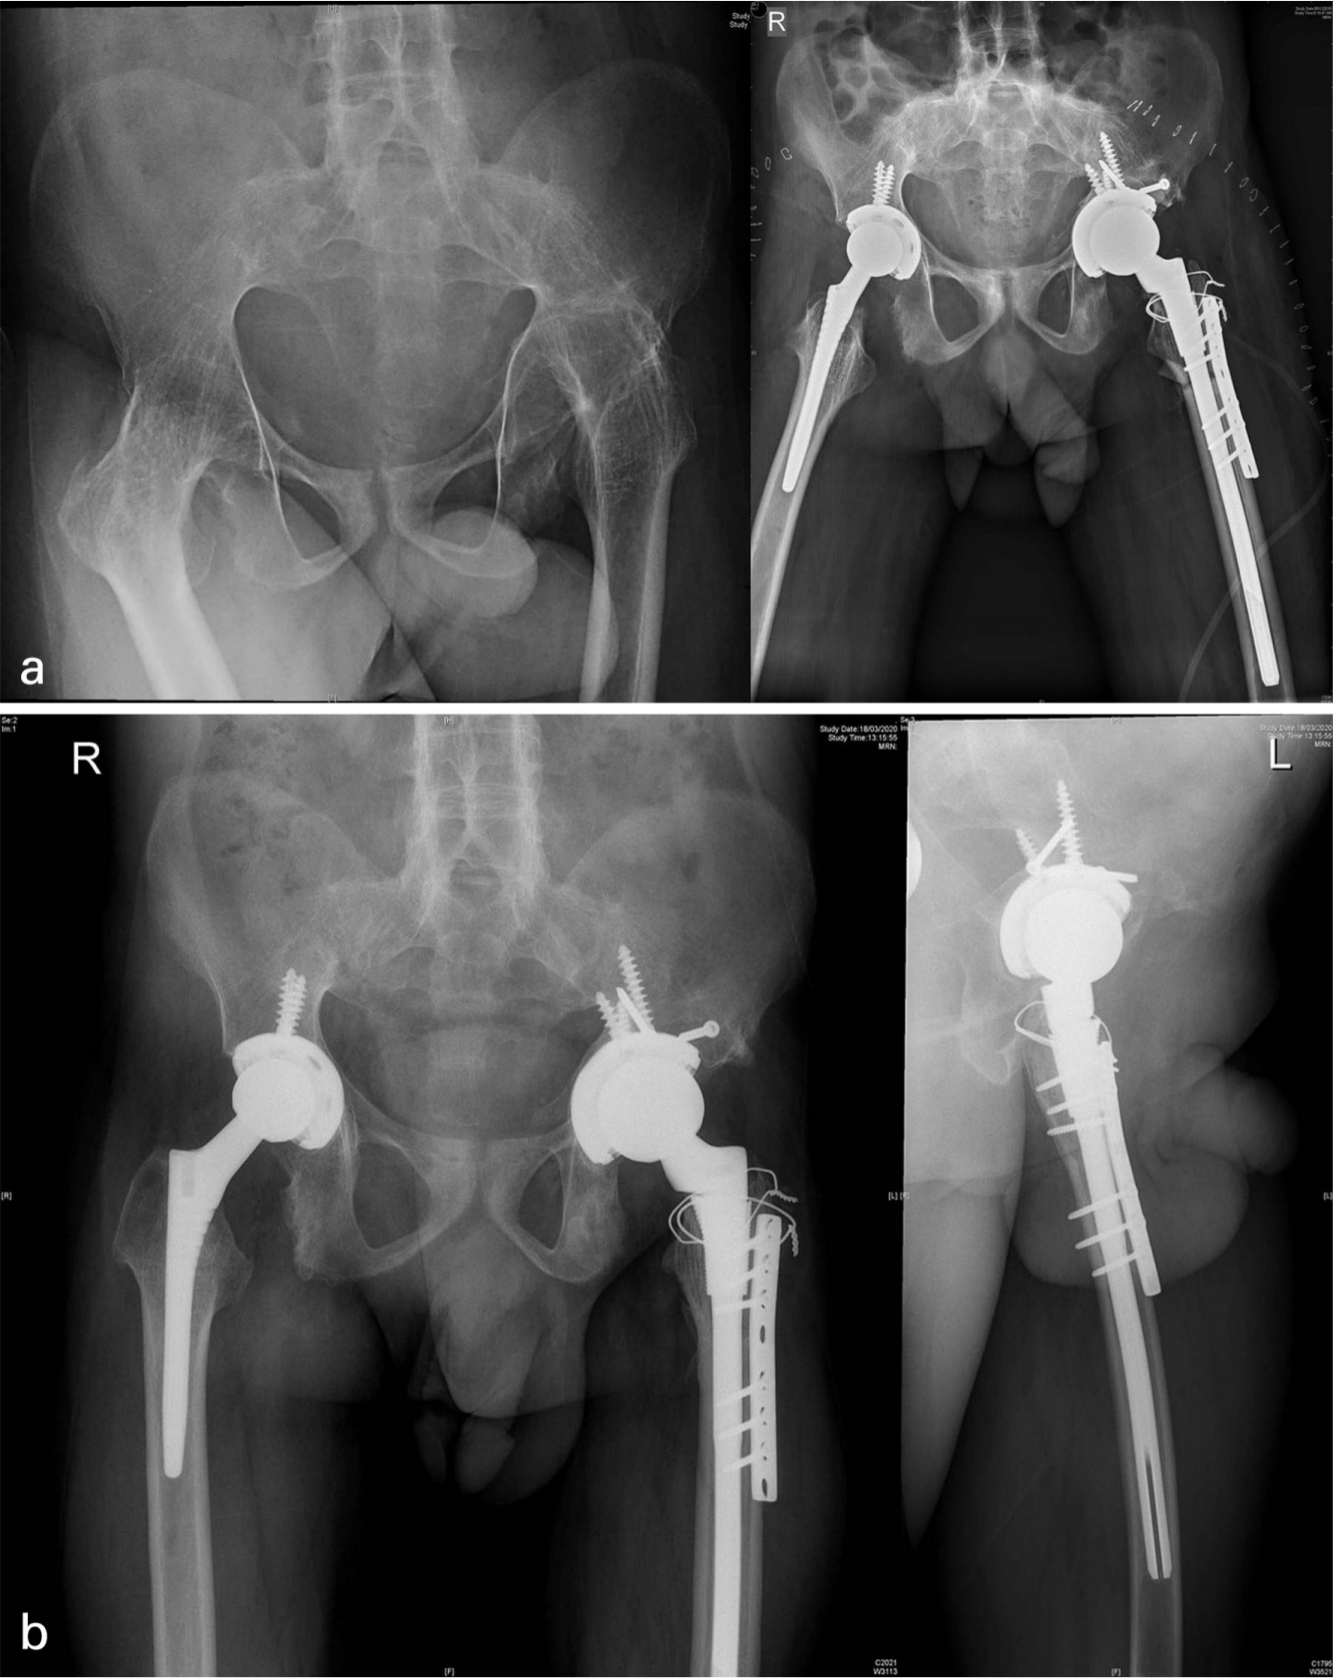 Fig. 4 
          (a) 31-year-old male with bilateral fused hips and ankylosing spondylitis. Proximal migration of the left hipwith femoral head and acetabular type 3b acetabular deficiency, bilateral THA with left hip femoral shortening. Acetabulum medial wall fracture, defect managed with bone graft and screws for superioraugmentation. SS wire for proximal femur incomplete split, femur plate for additional rotational stability. (b) 15-month follow-up with osteotomy site union, acetabulum graft well united. Lateral view confirming osteotomy site union and component femur position.
        